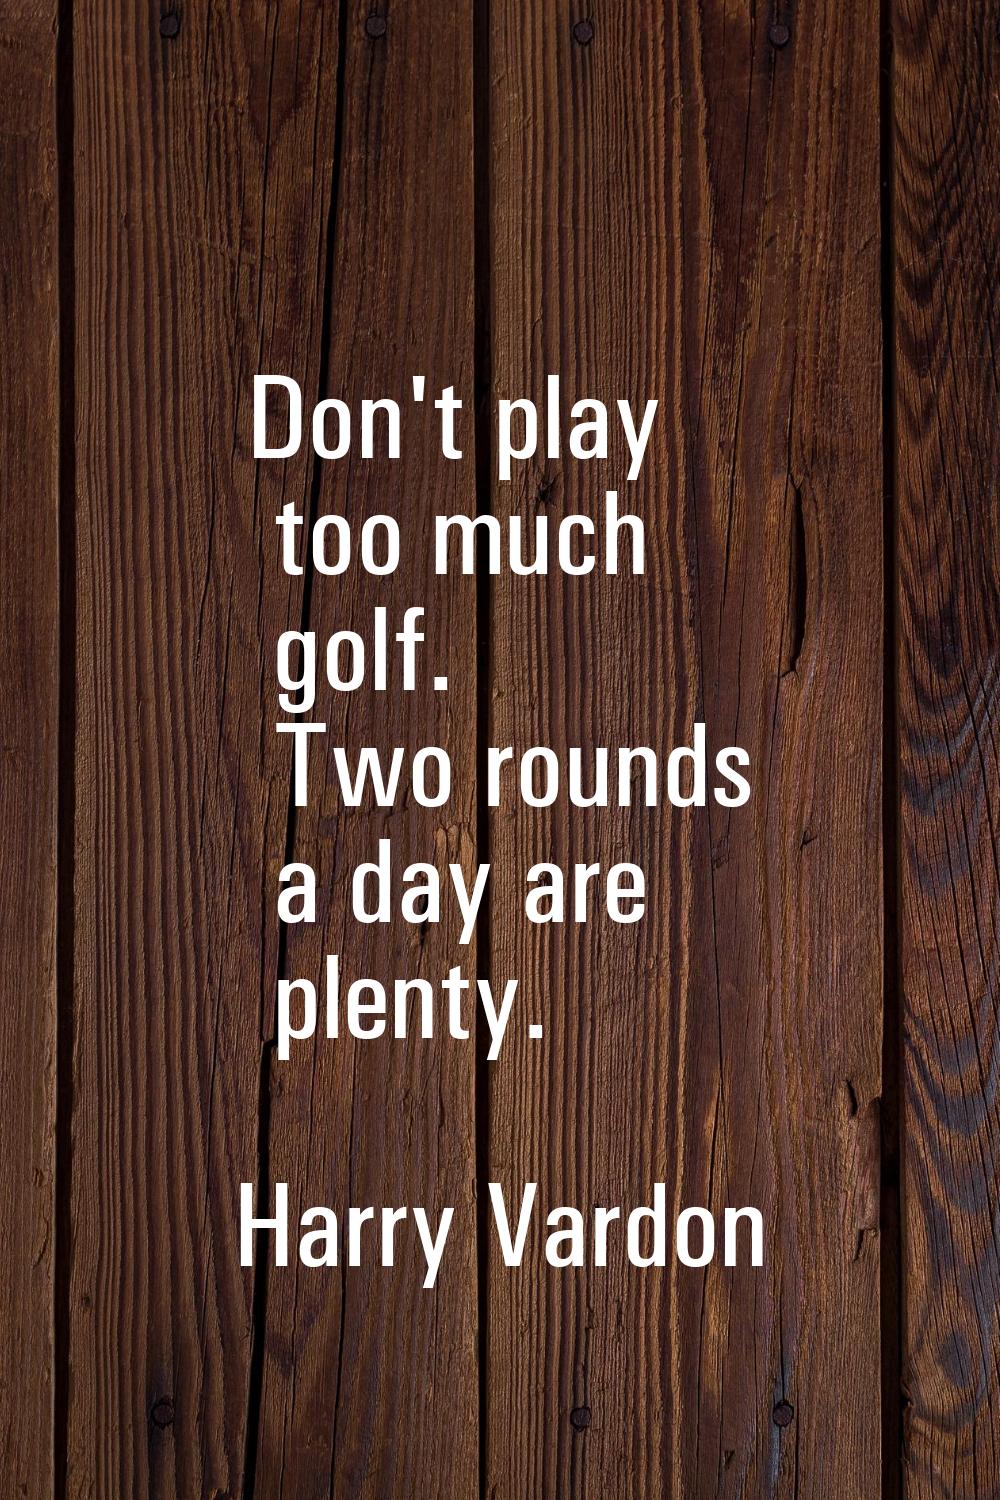 Don't play too much golf. Two rounds a day are plenty.